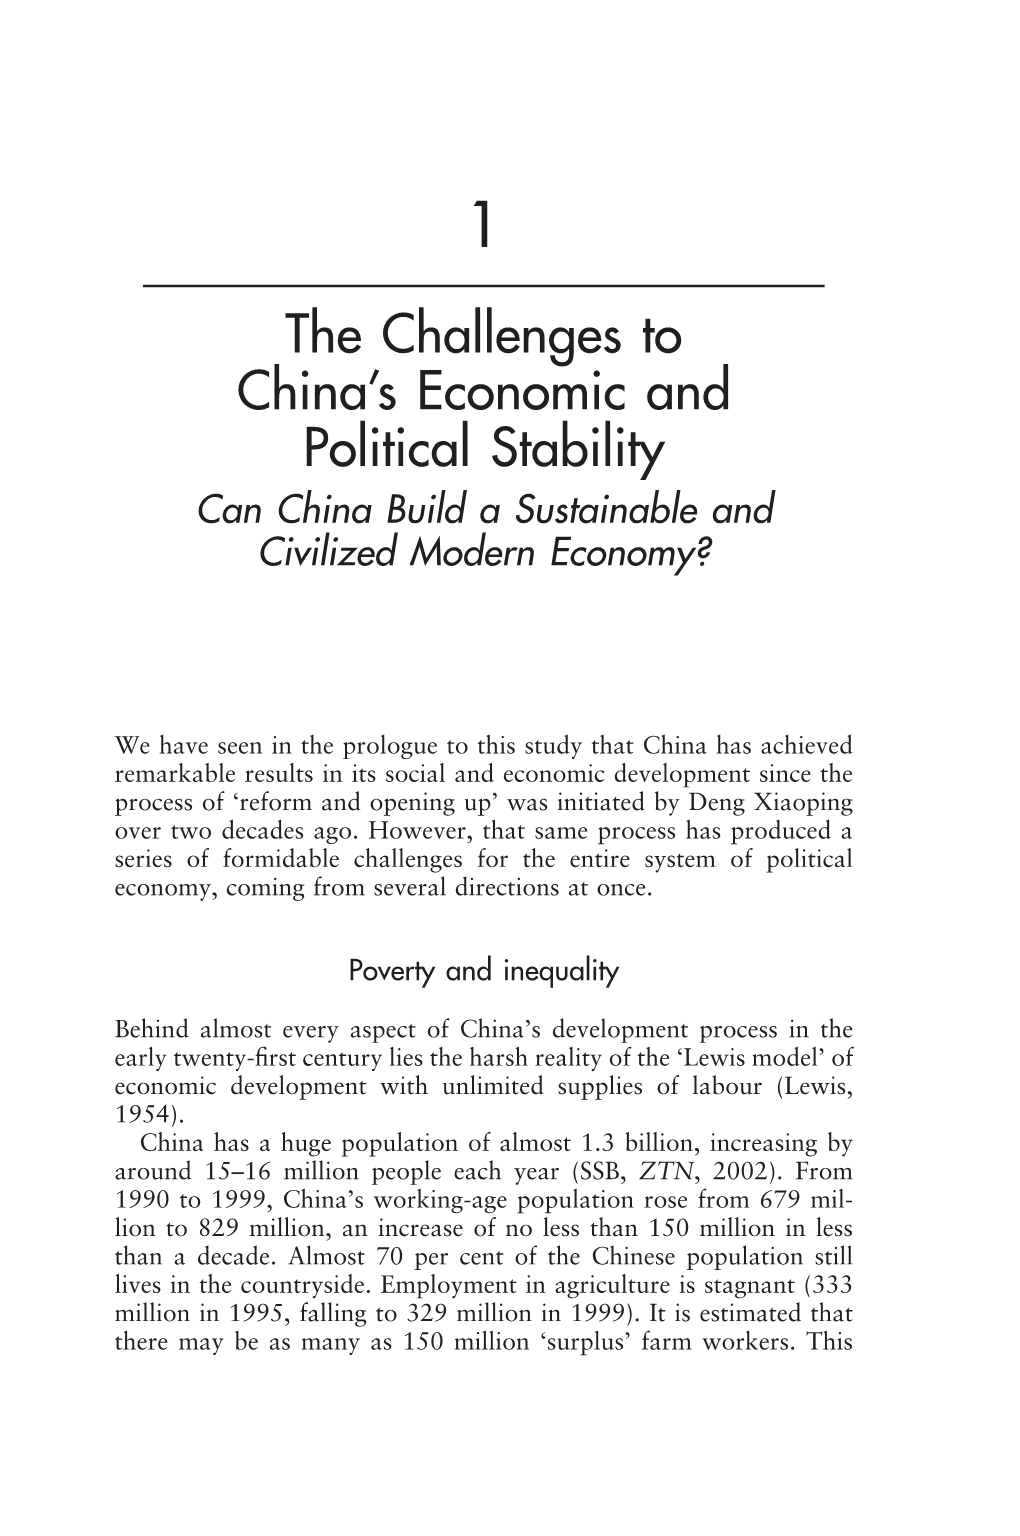 The Challenges to China's Economic and Political Stability